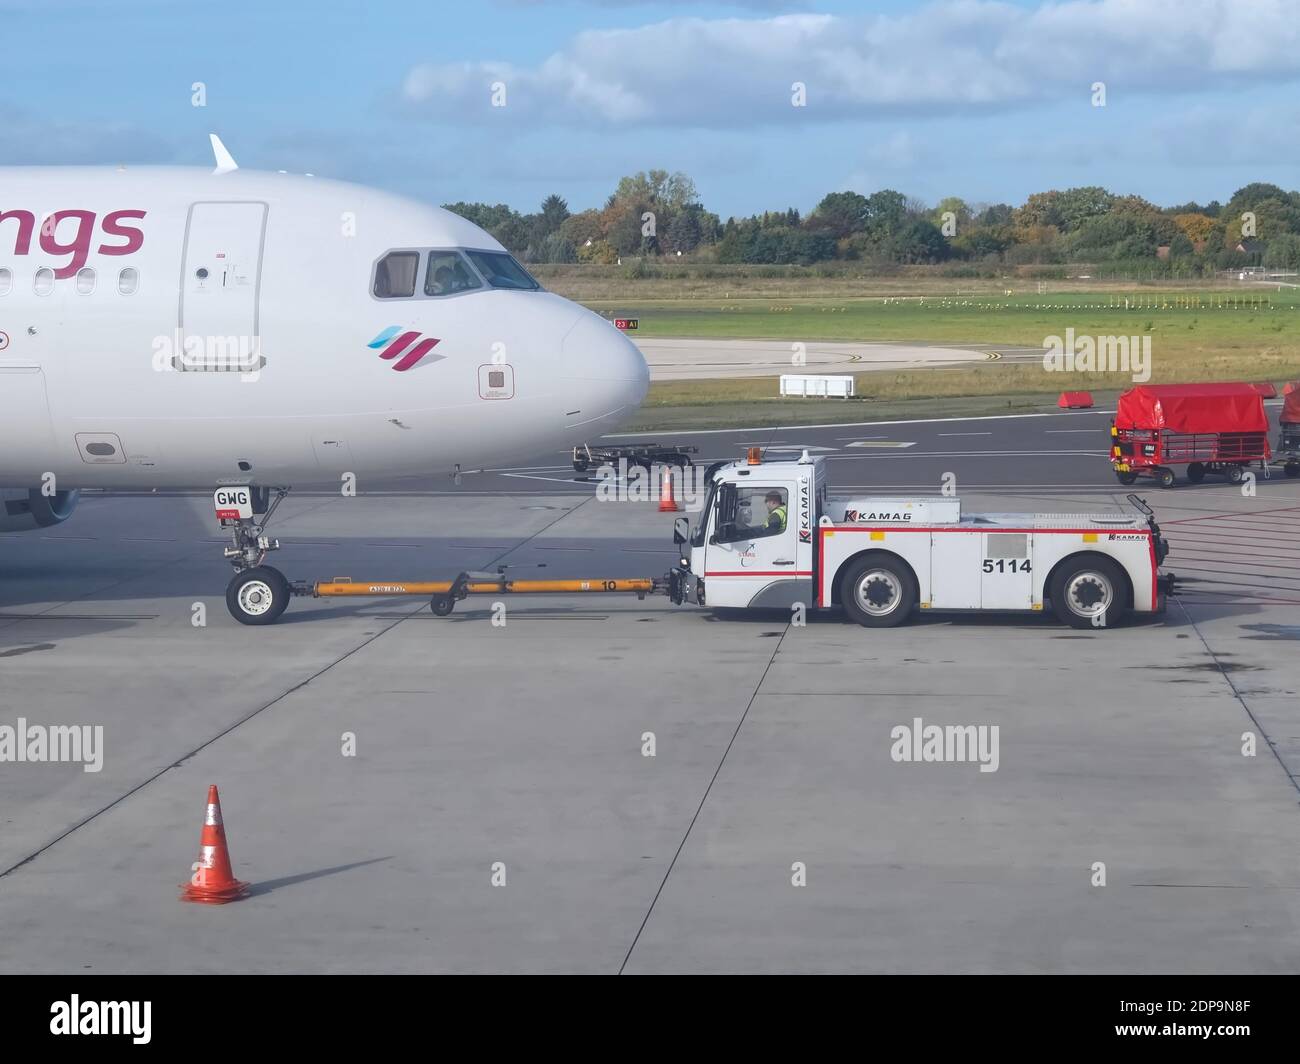 Eurowings airplane at Faro airport is towed onto the tarmac Stock Photo